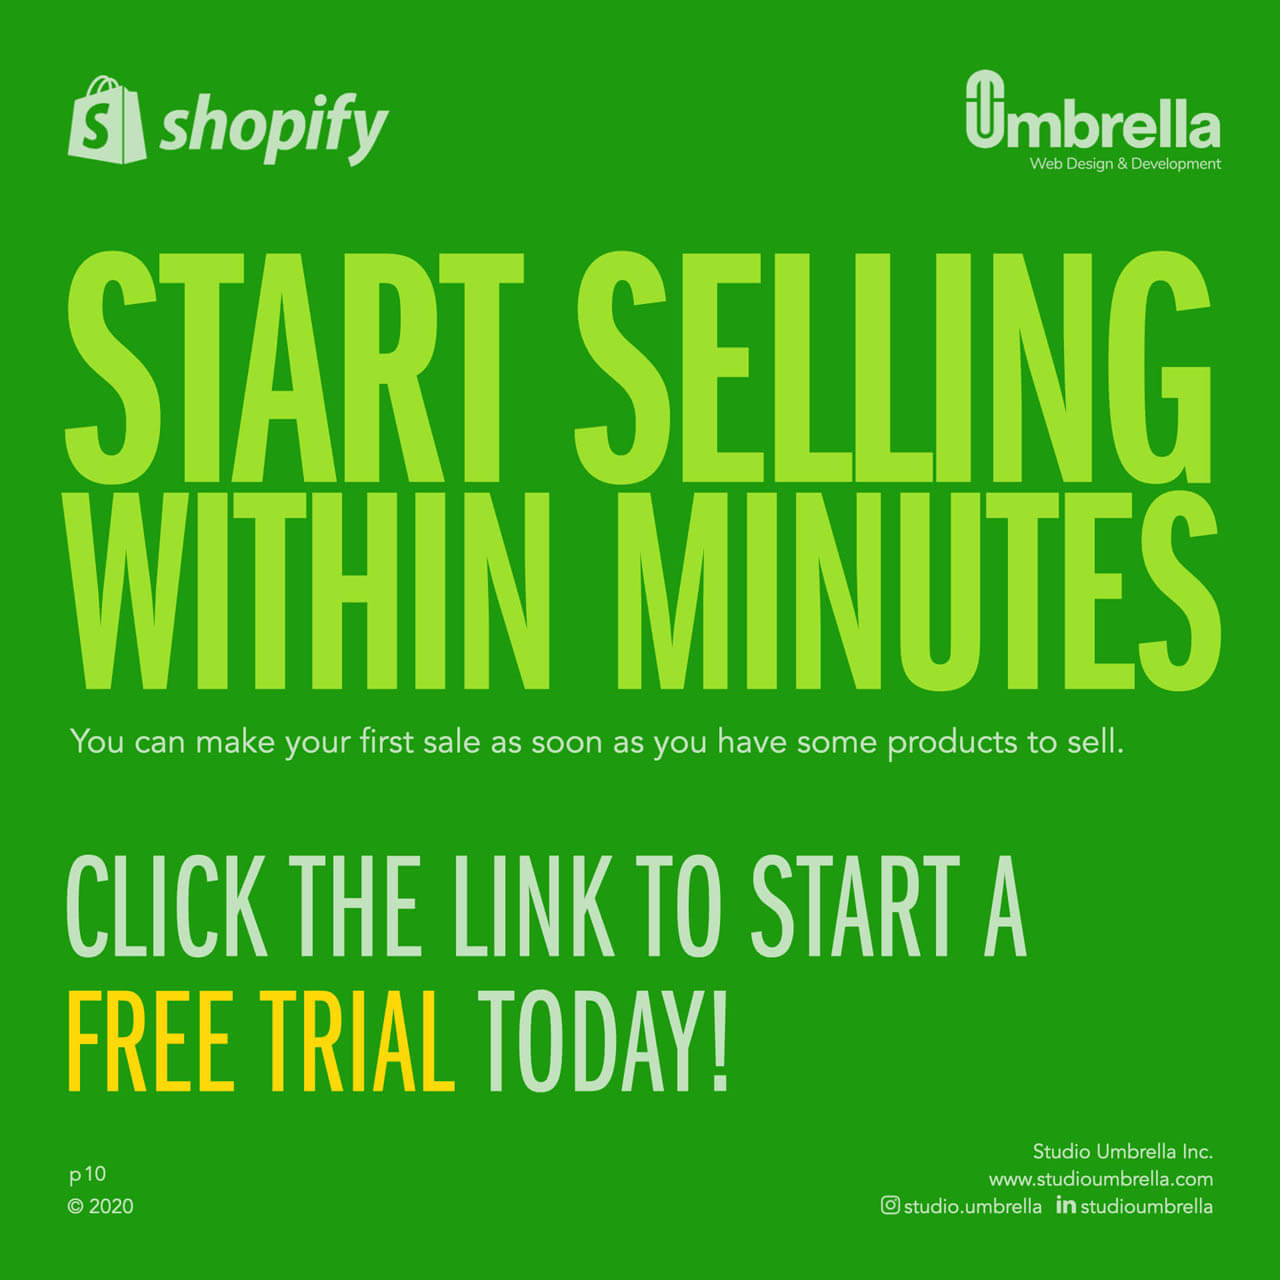 Start selling within minutes